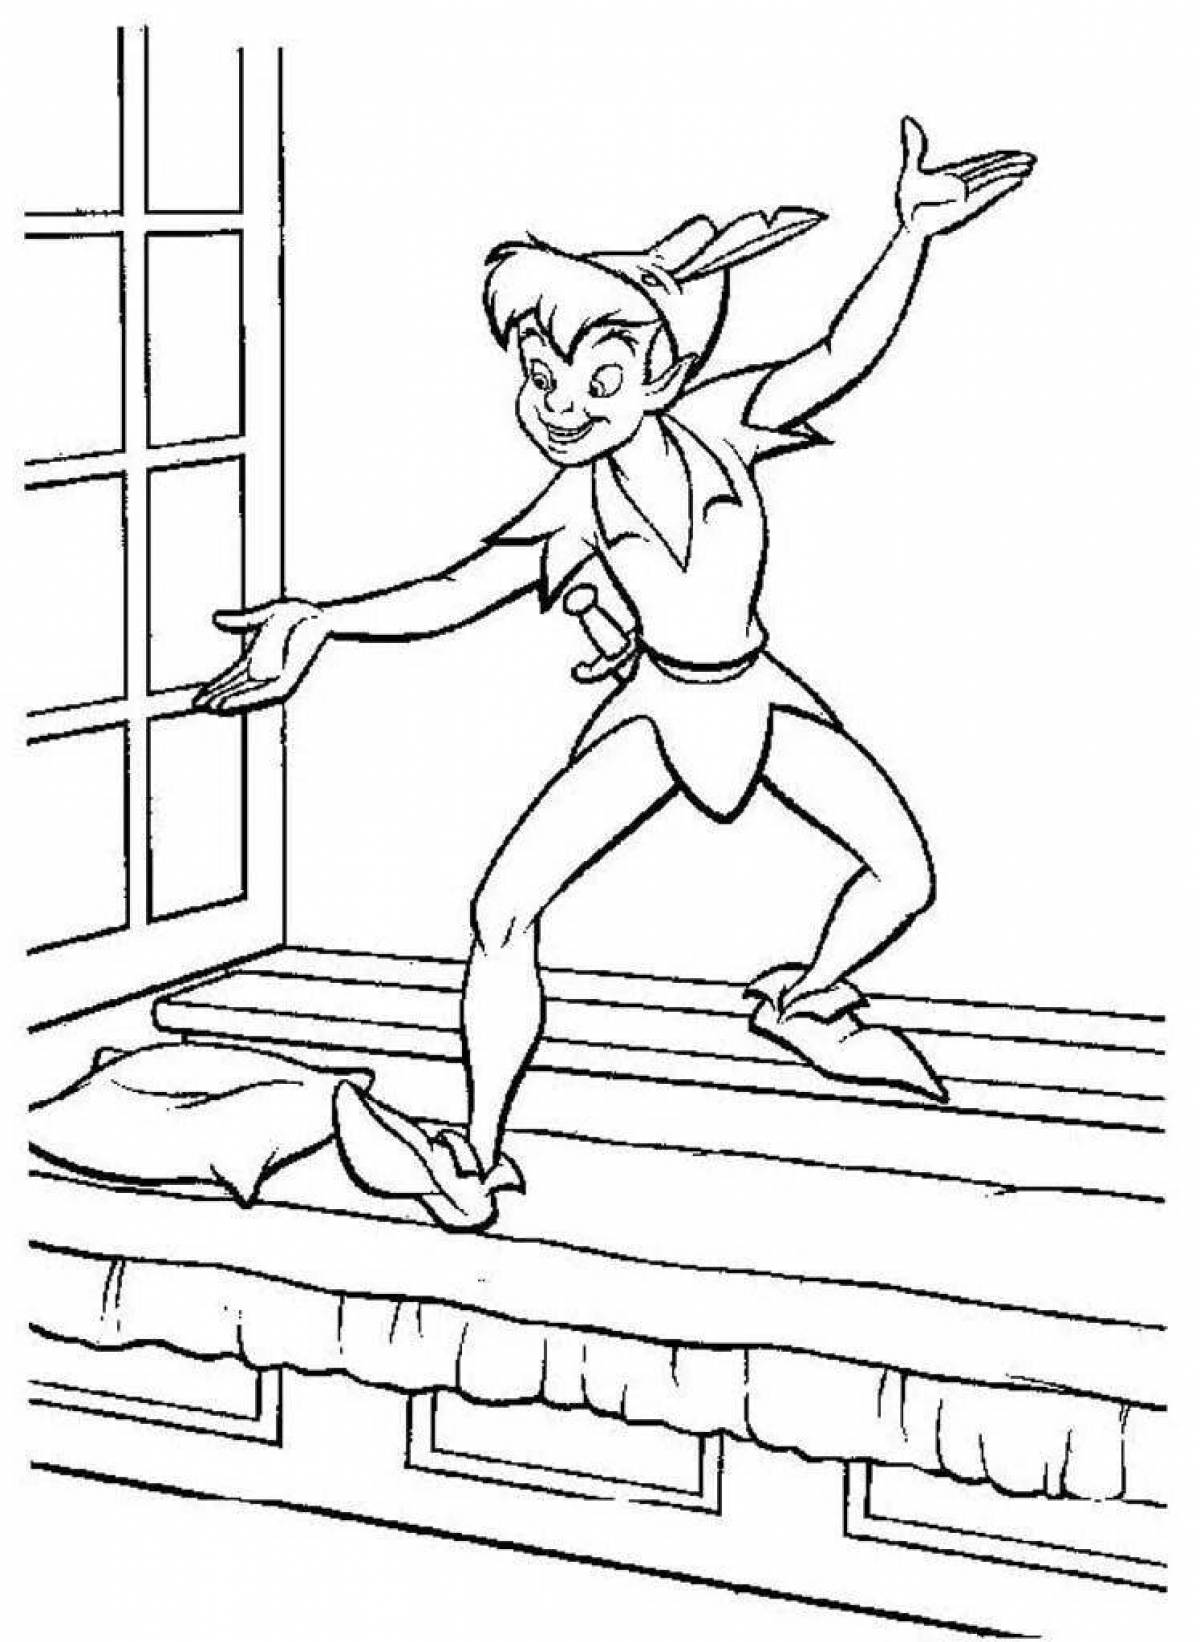 Peter pan's amazing coloring page